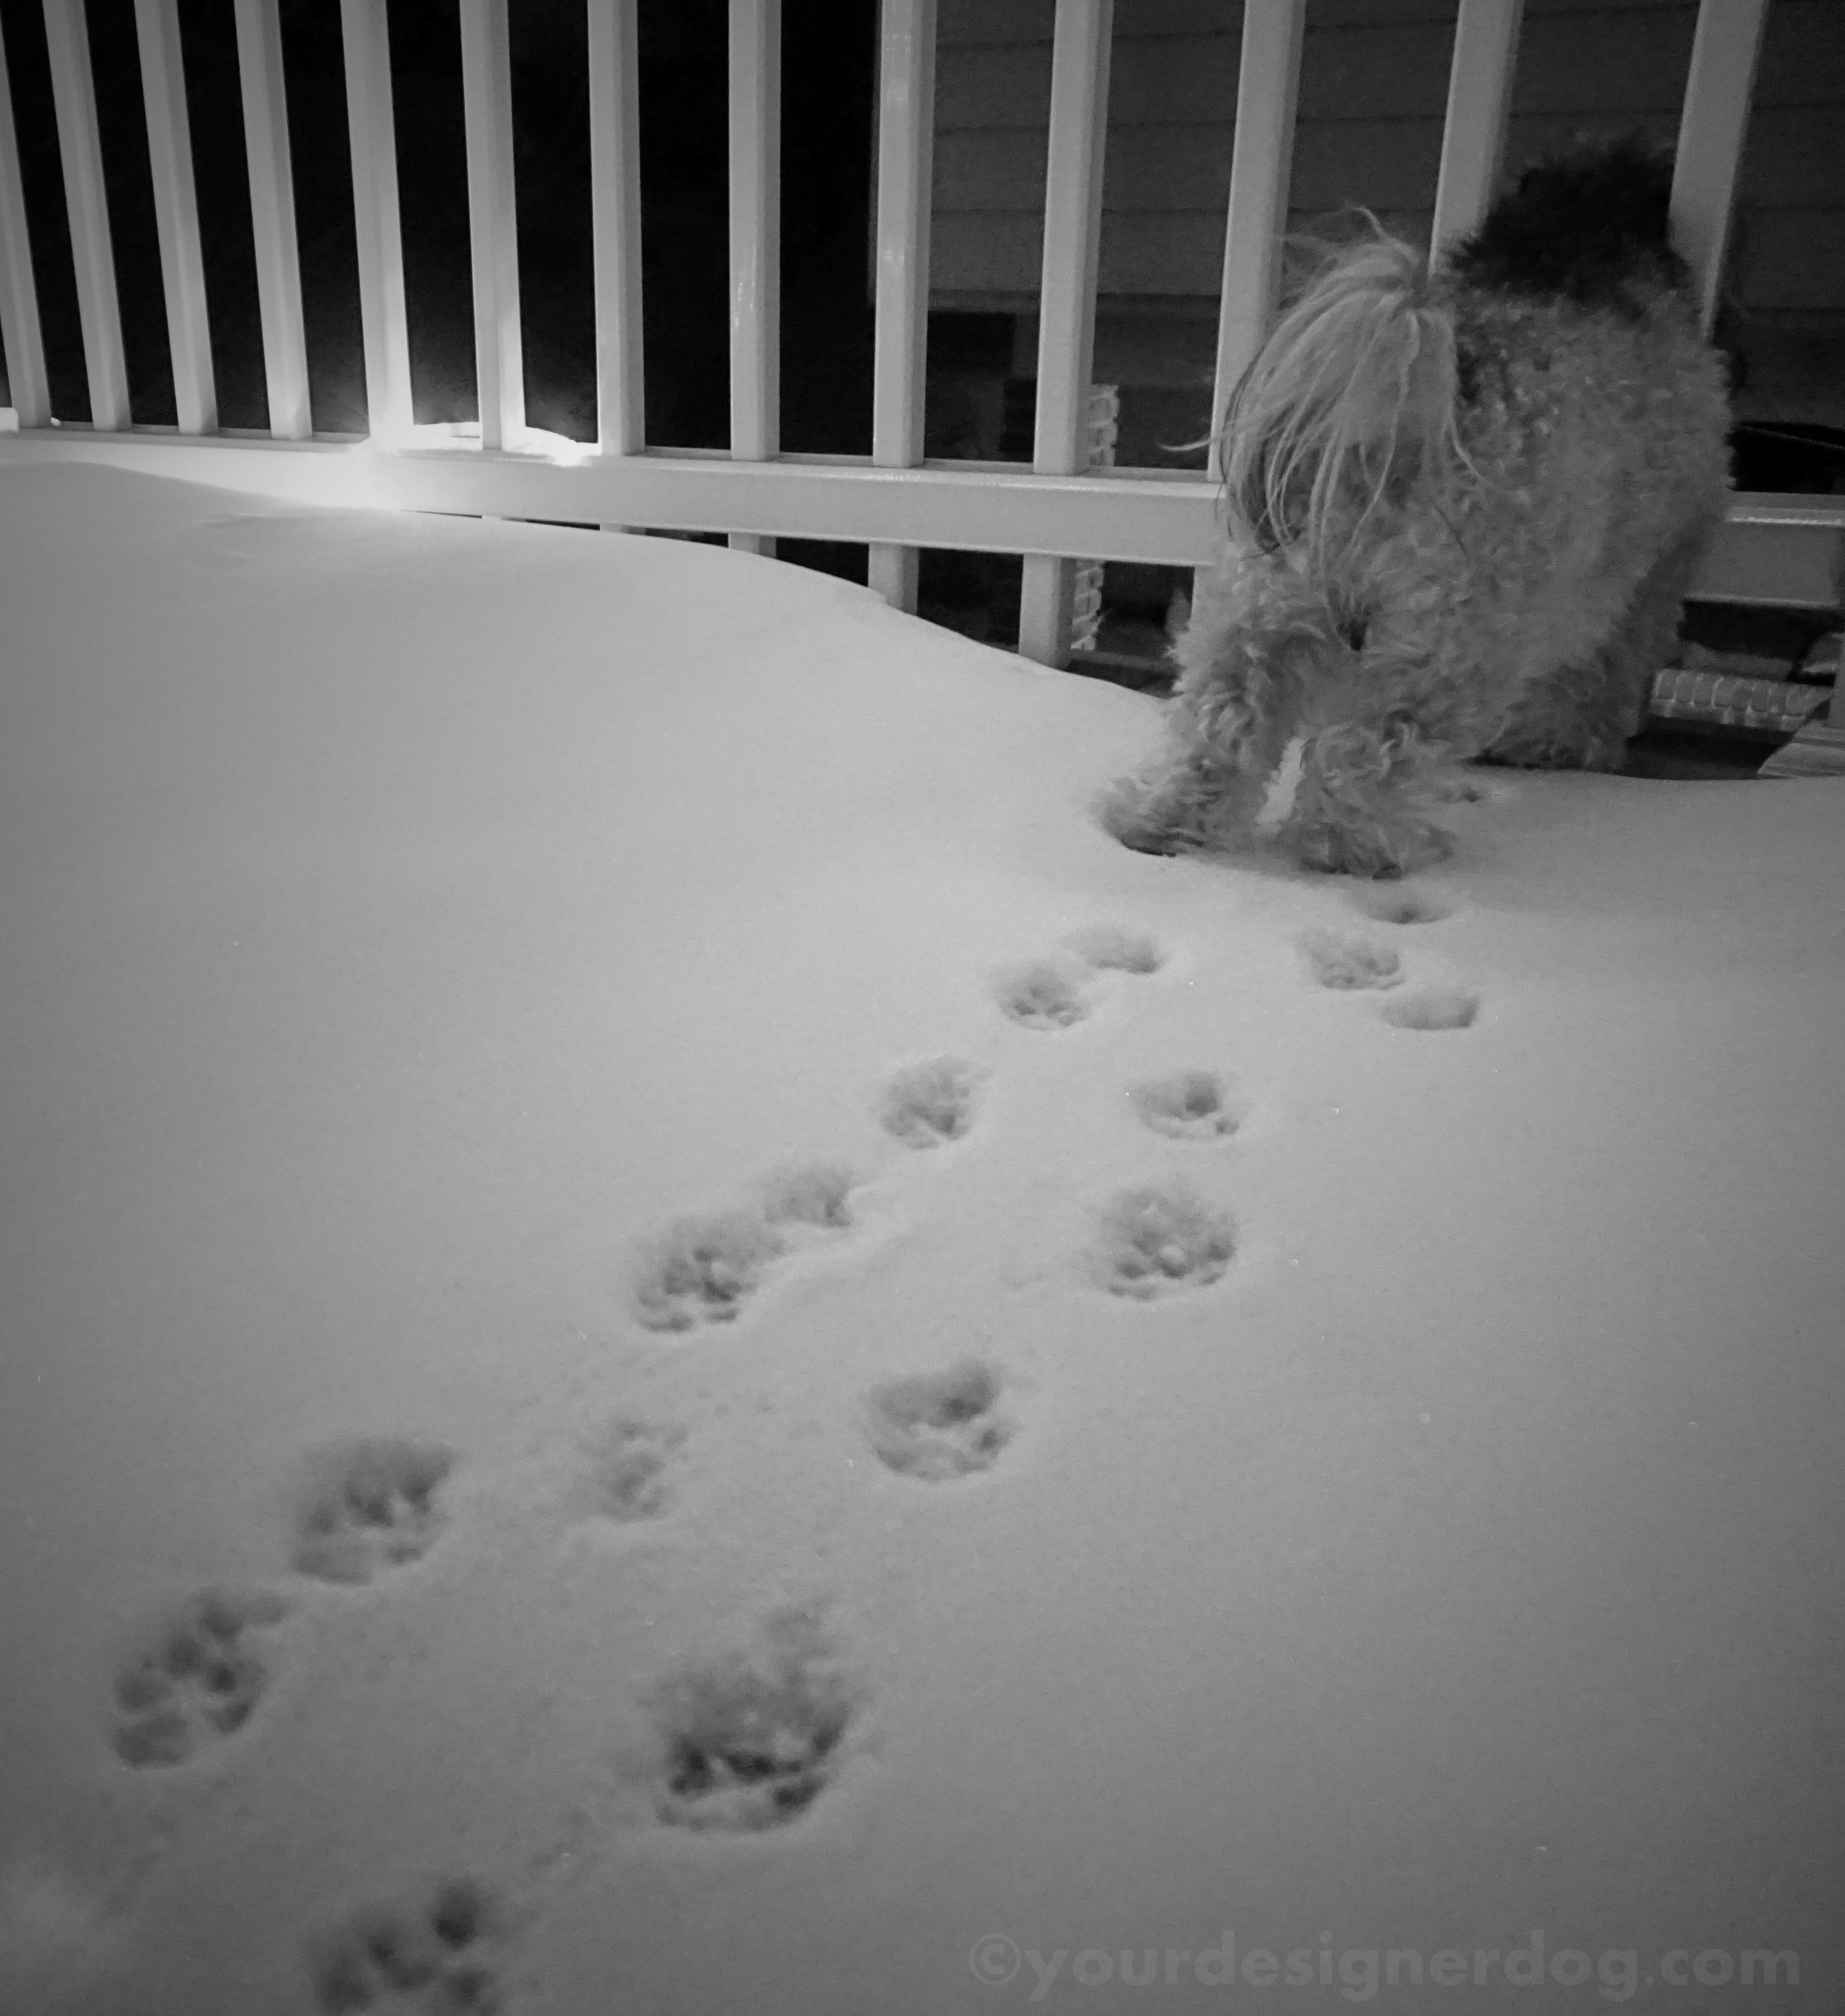 dogs, designer dogs, yorkipoo, yorkie poo, paw prints, black and white photography, snow, winter